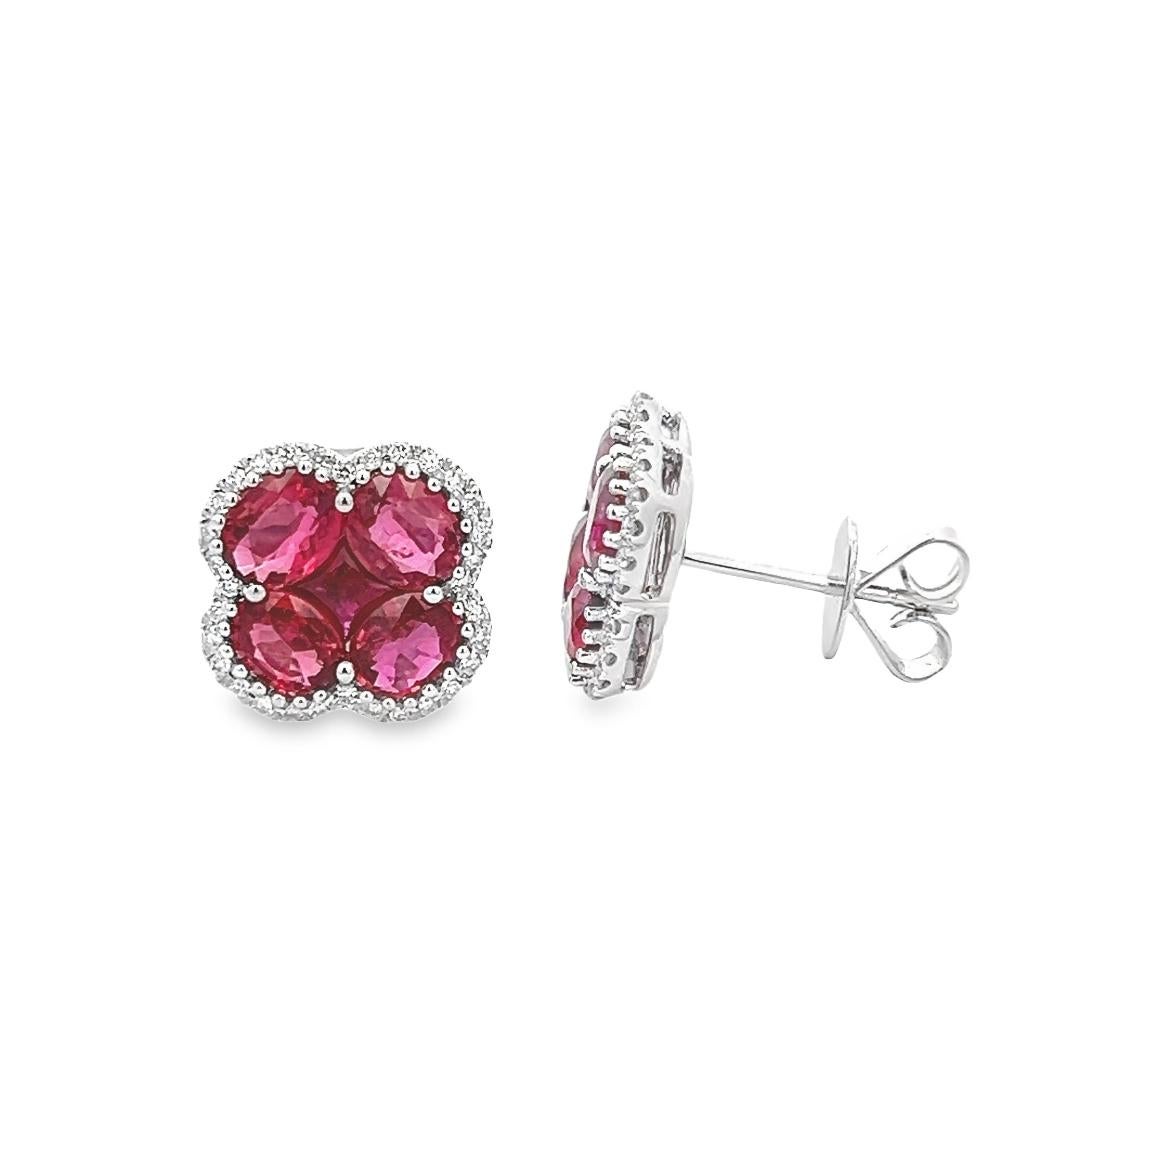 This wonderful pair of earrings are made of Natural Rubies and a Good Quality of  Earthborn Diamonds summarizing the pair beauty, set in polished 18K White Gold setting making this pieces an excellent accessory that can be used in a any occasion of